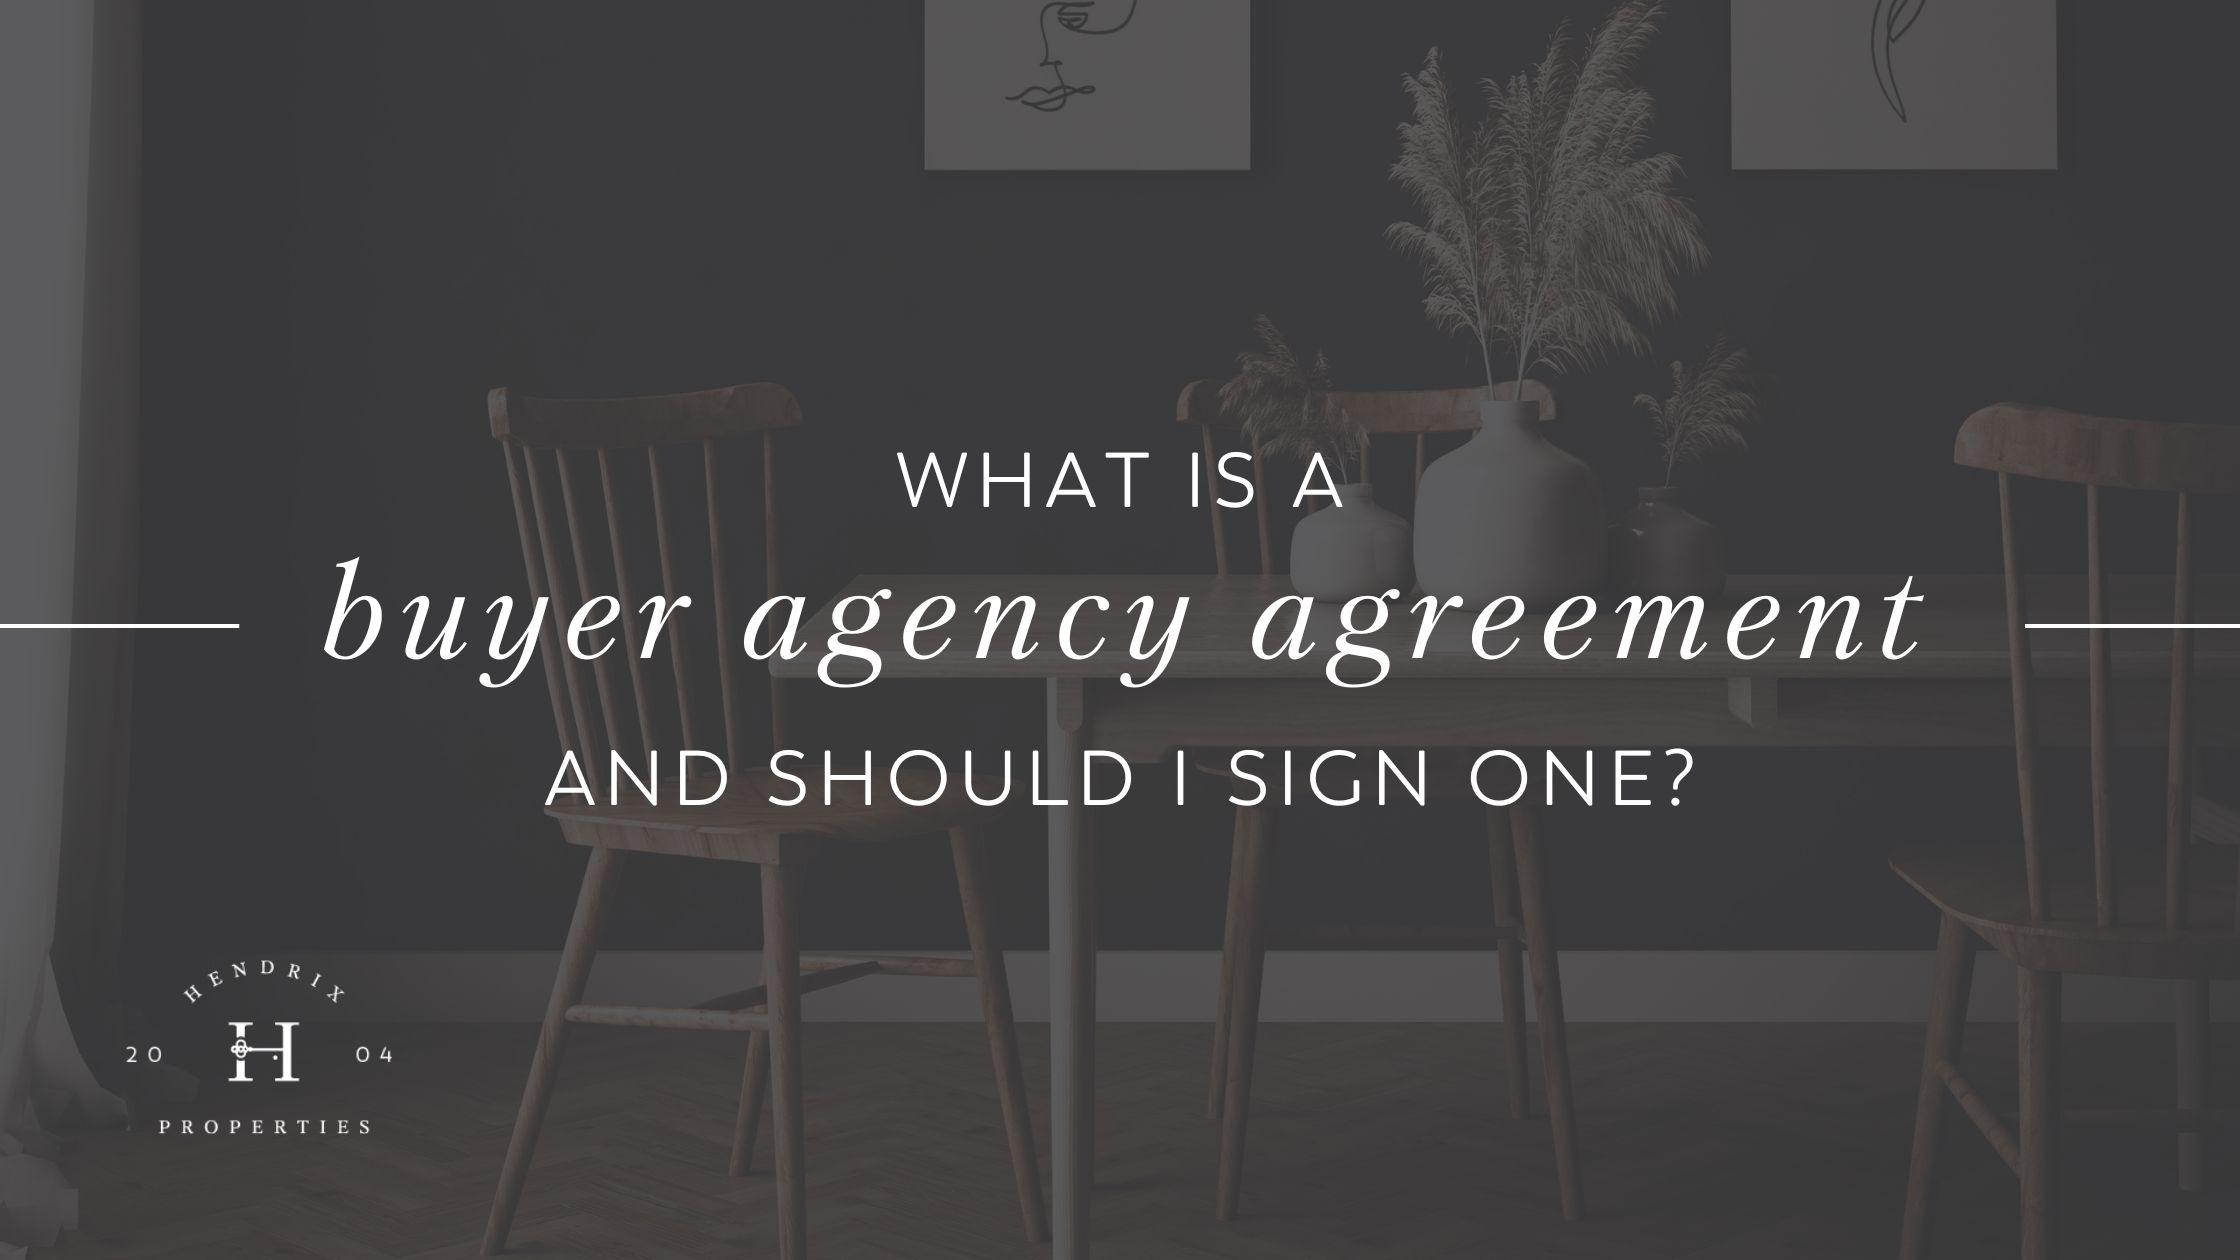 What is a buyer agency agreement?